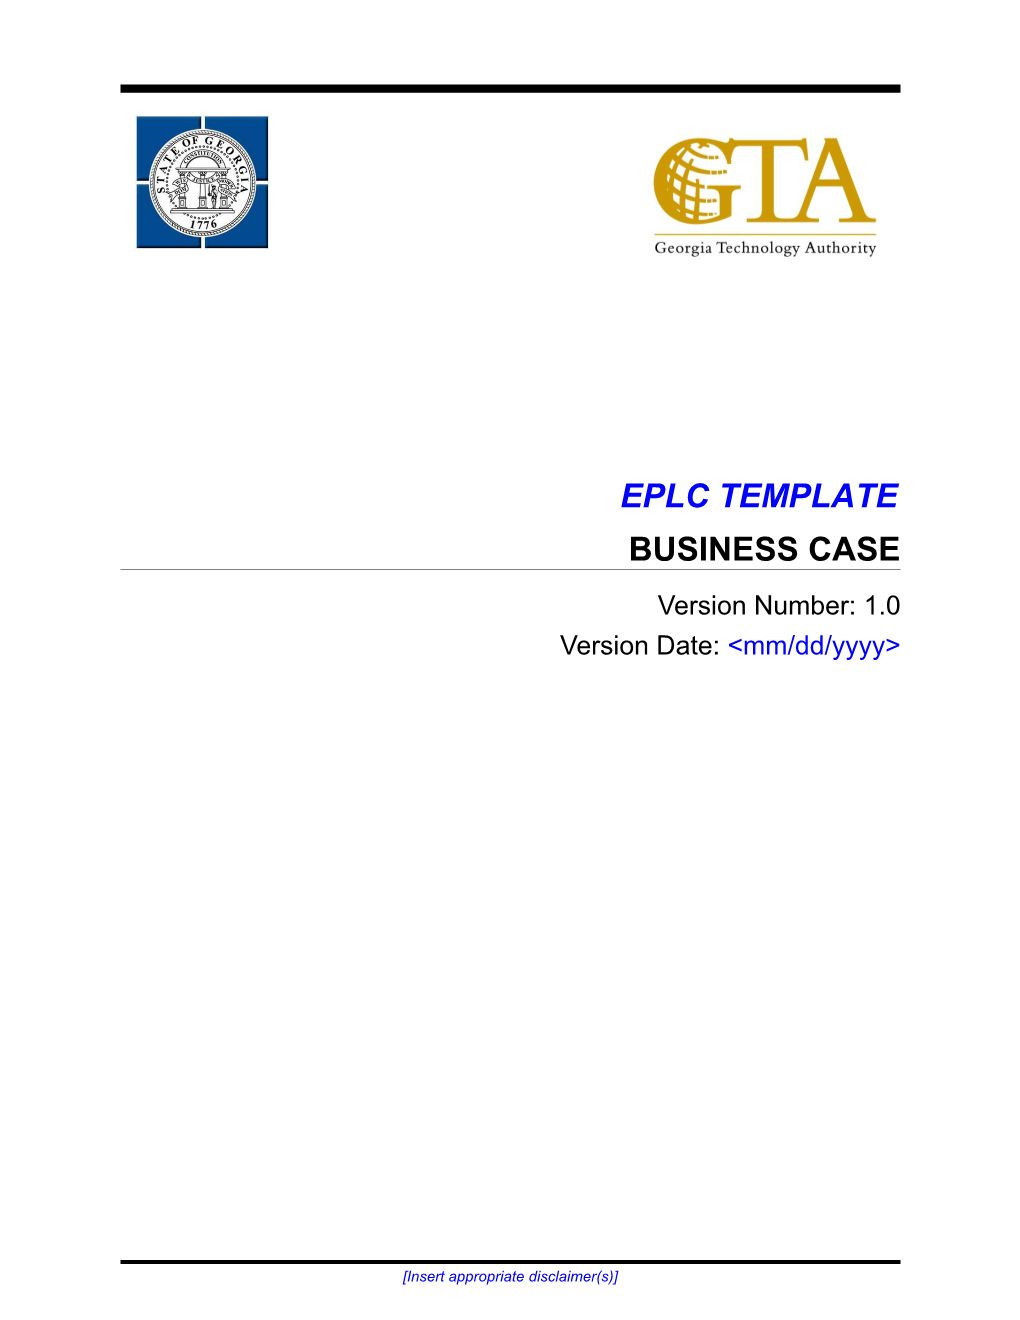 EPLC Templatebusiness Caseversion: 1.0Error! Unknown Document Property Name